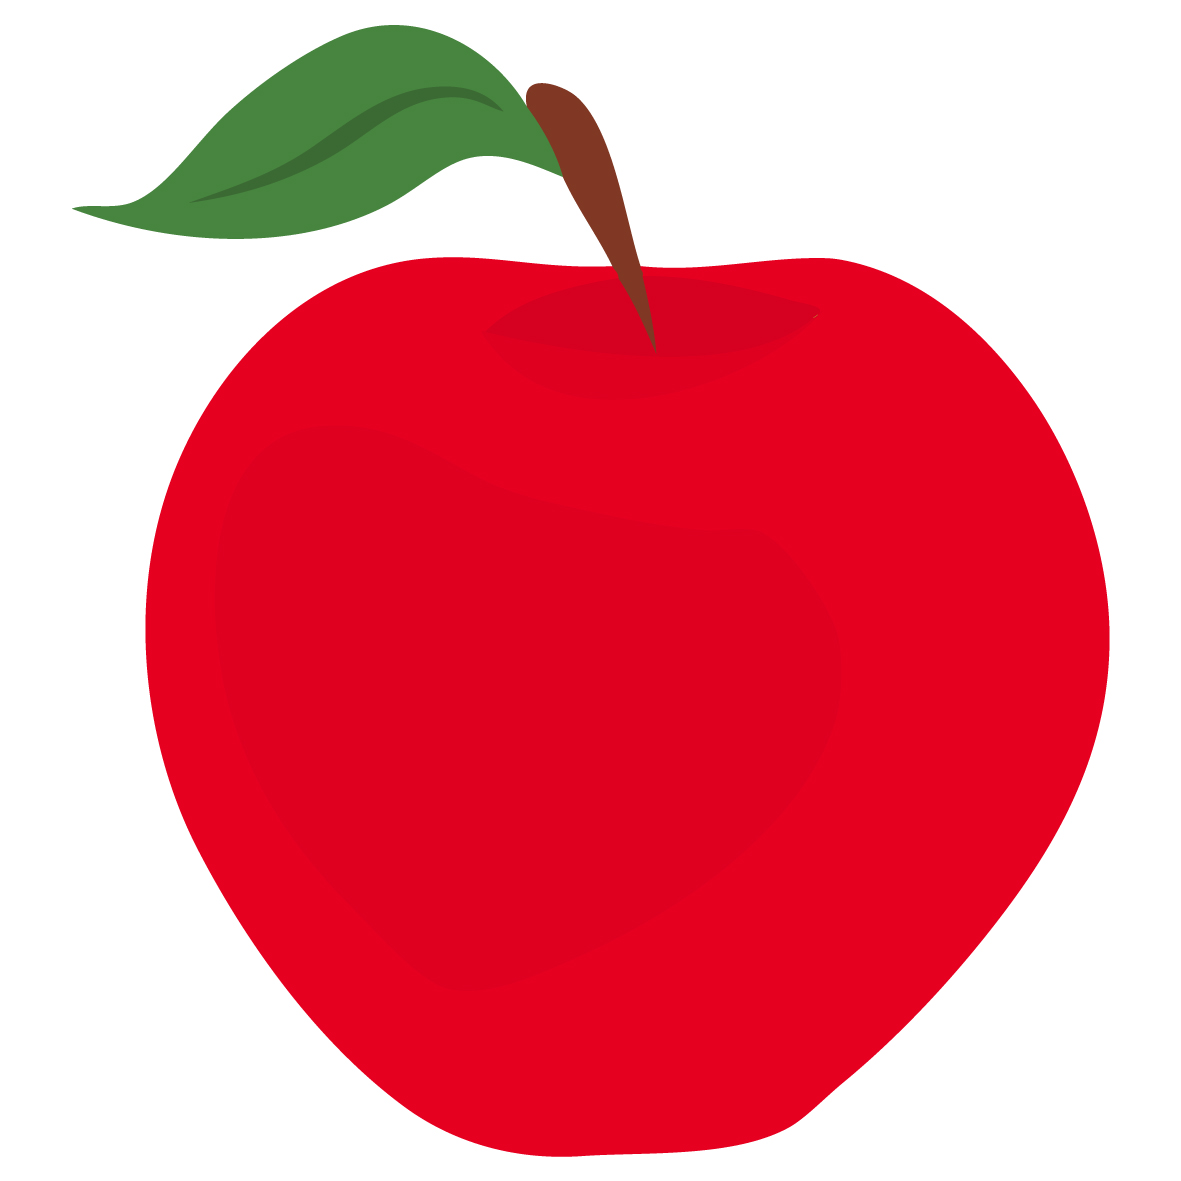 free clipart images for apple - photo #20